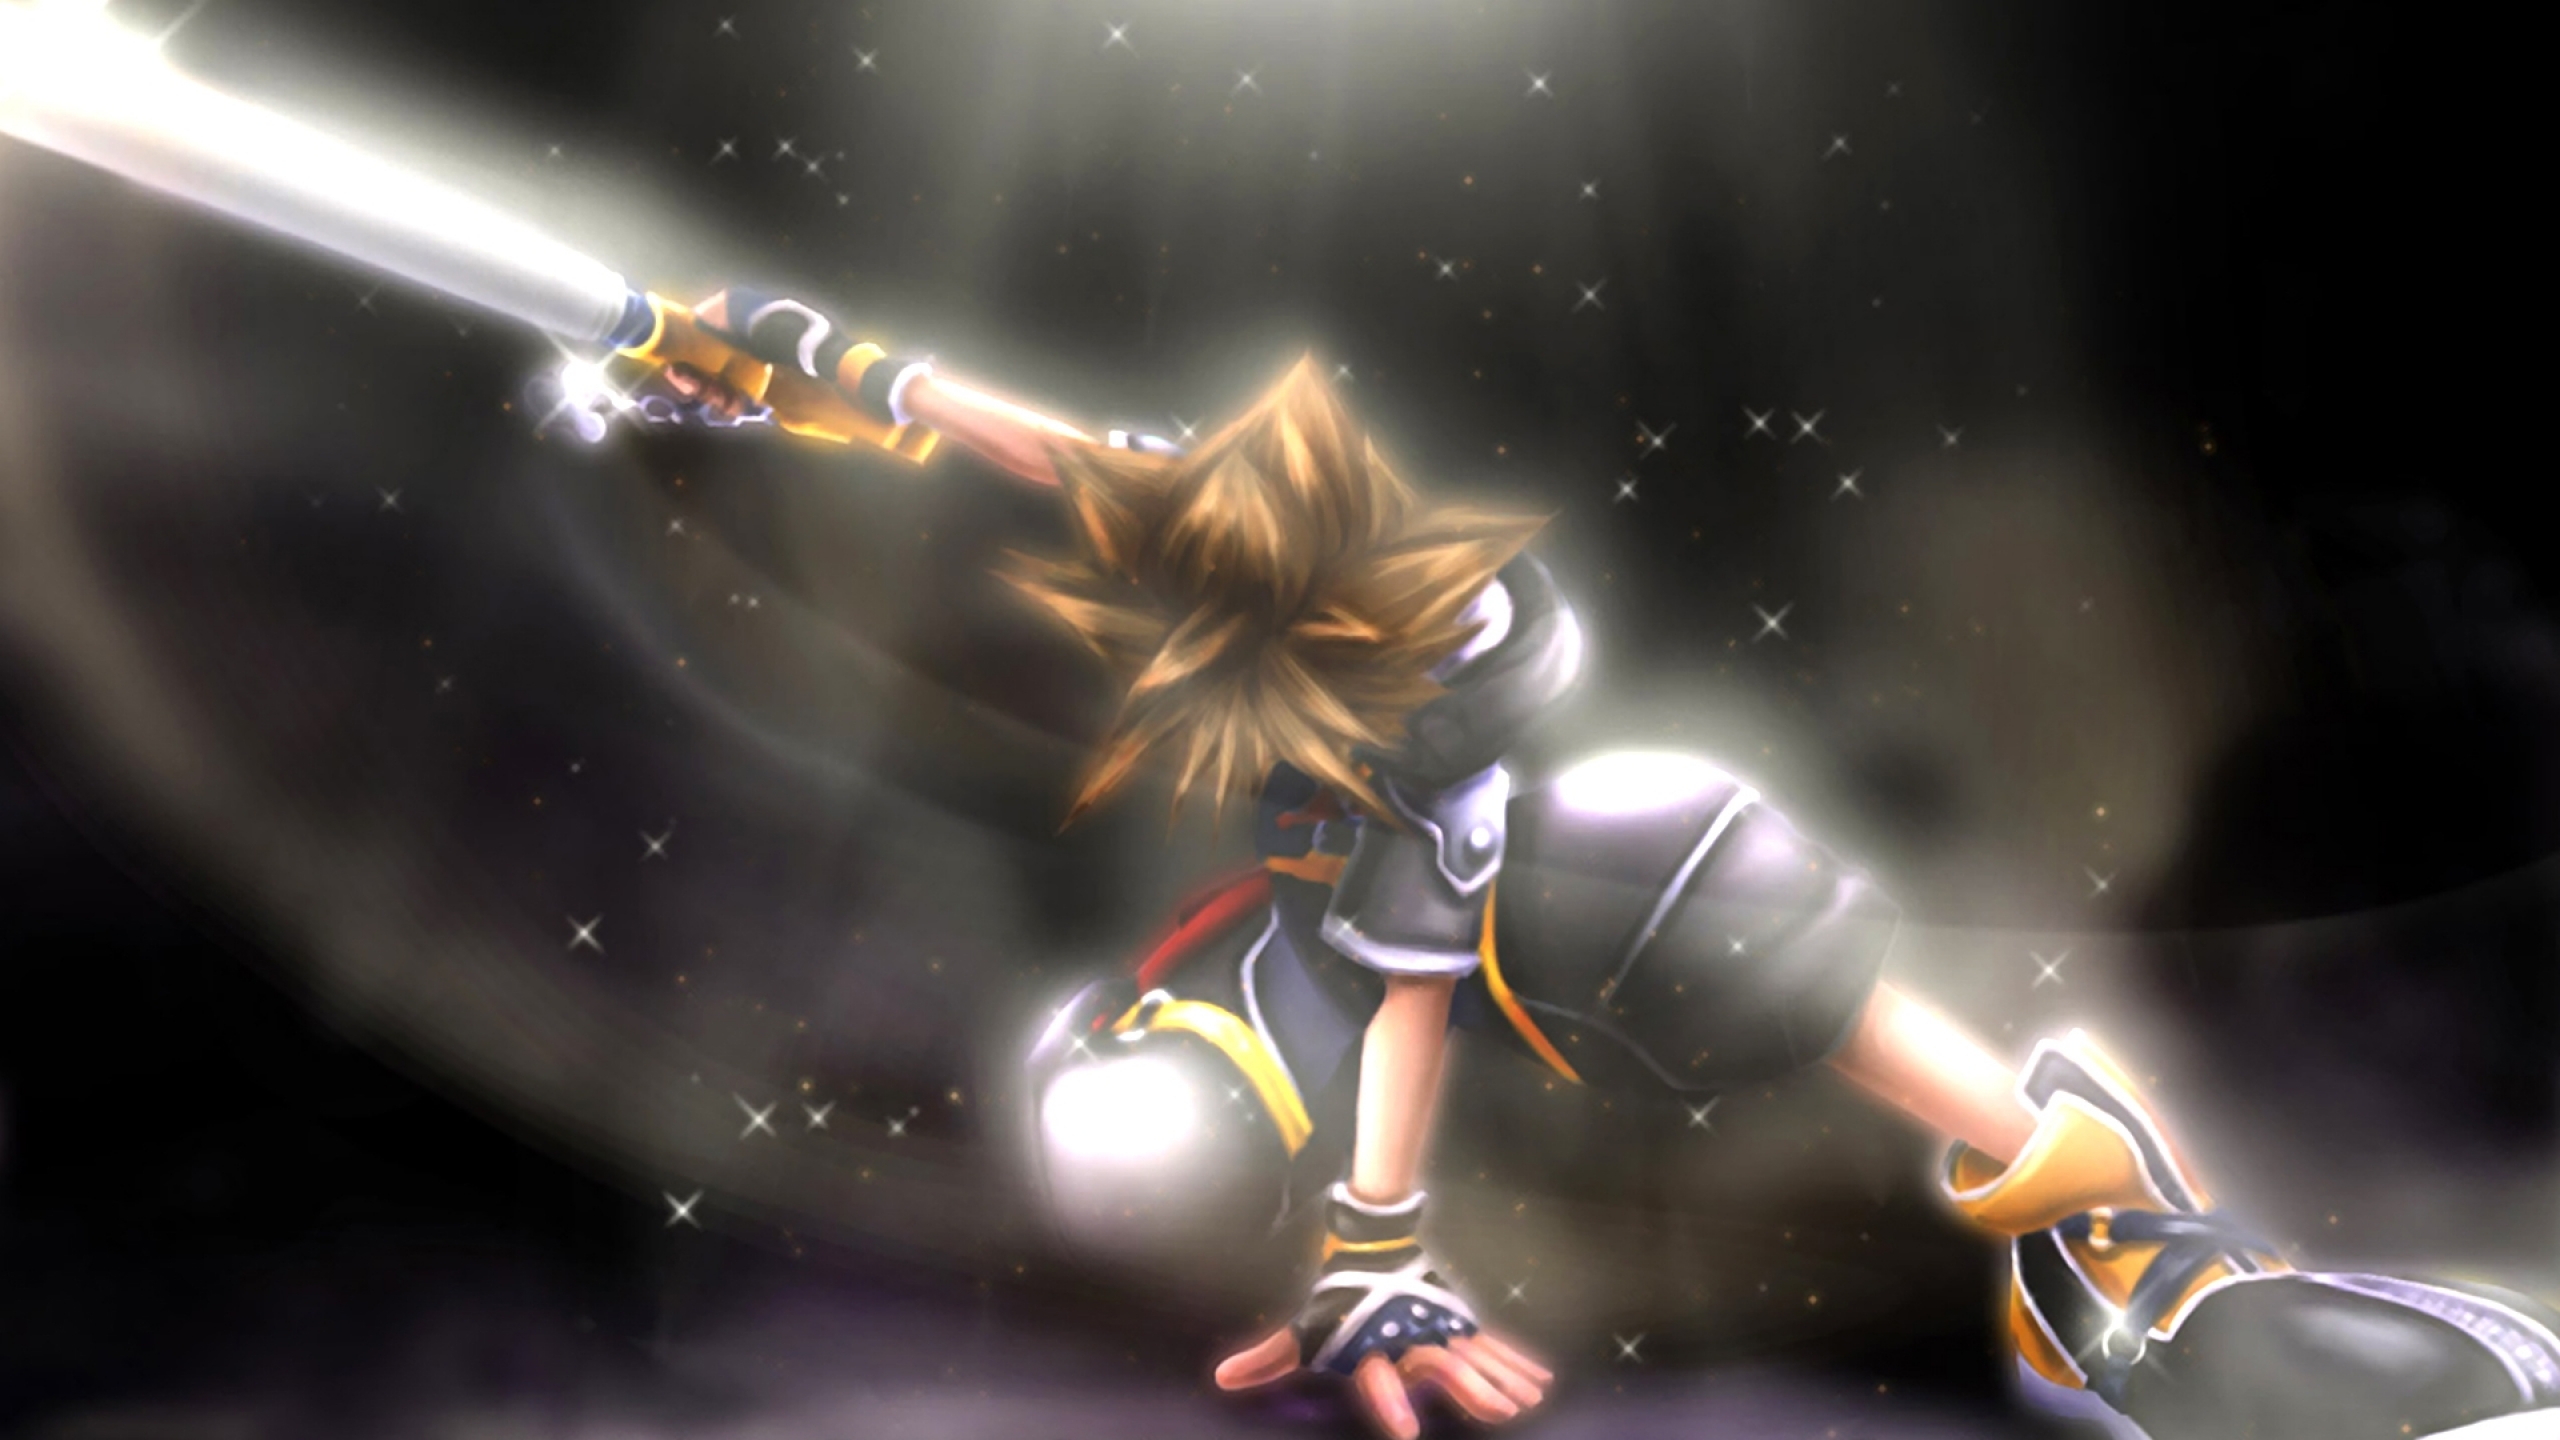 Free Download Wallpapers Download 2560x1440 Kingdom Hearts 19x1080 Wallpaper 2560x1440 For Your Desktop Mobile Tablet Explore 47 Kingdom Hearts Wallpaper Android Kingdom Hearts Wallpaper Android Kingdom Hearts Background Kingdom Hearts